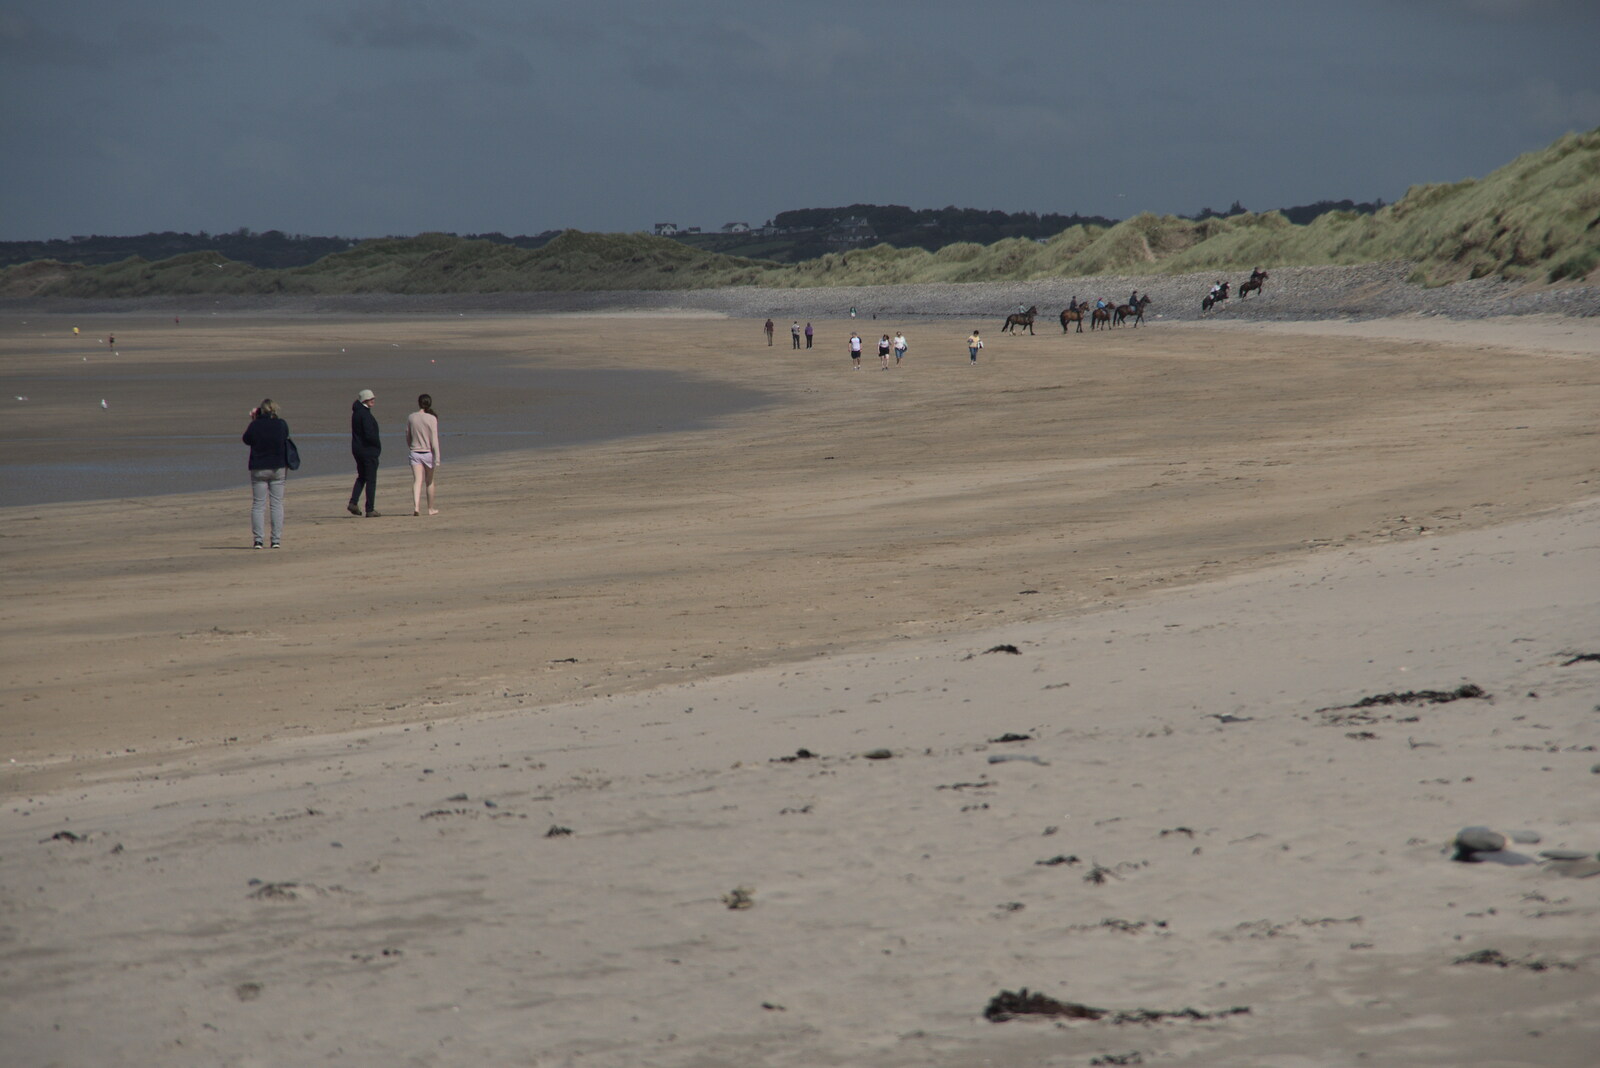 A Trip to Manorhamilton, County Leitrim, Ireland - 11th August 2021: Walkers and horses on the beach